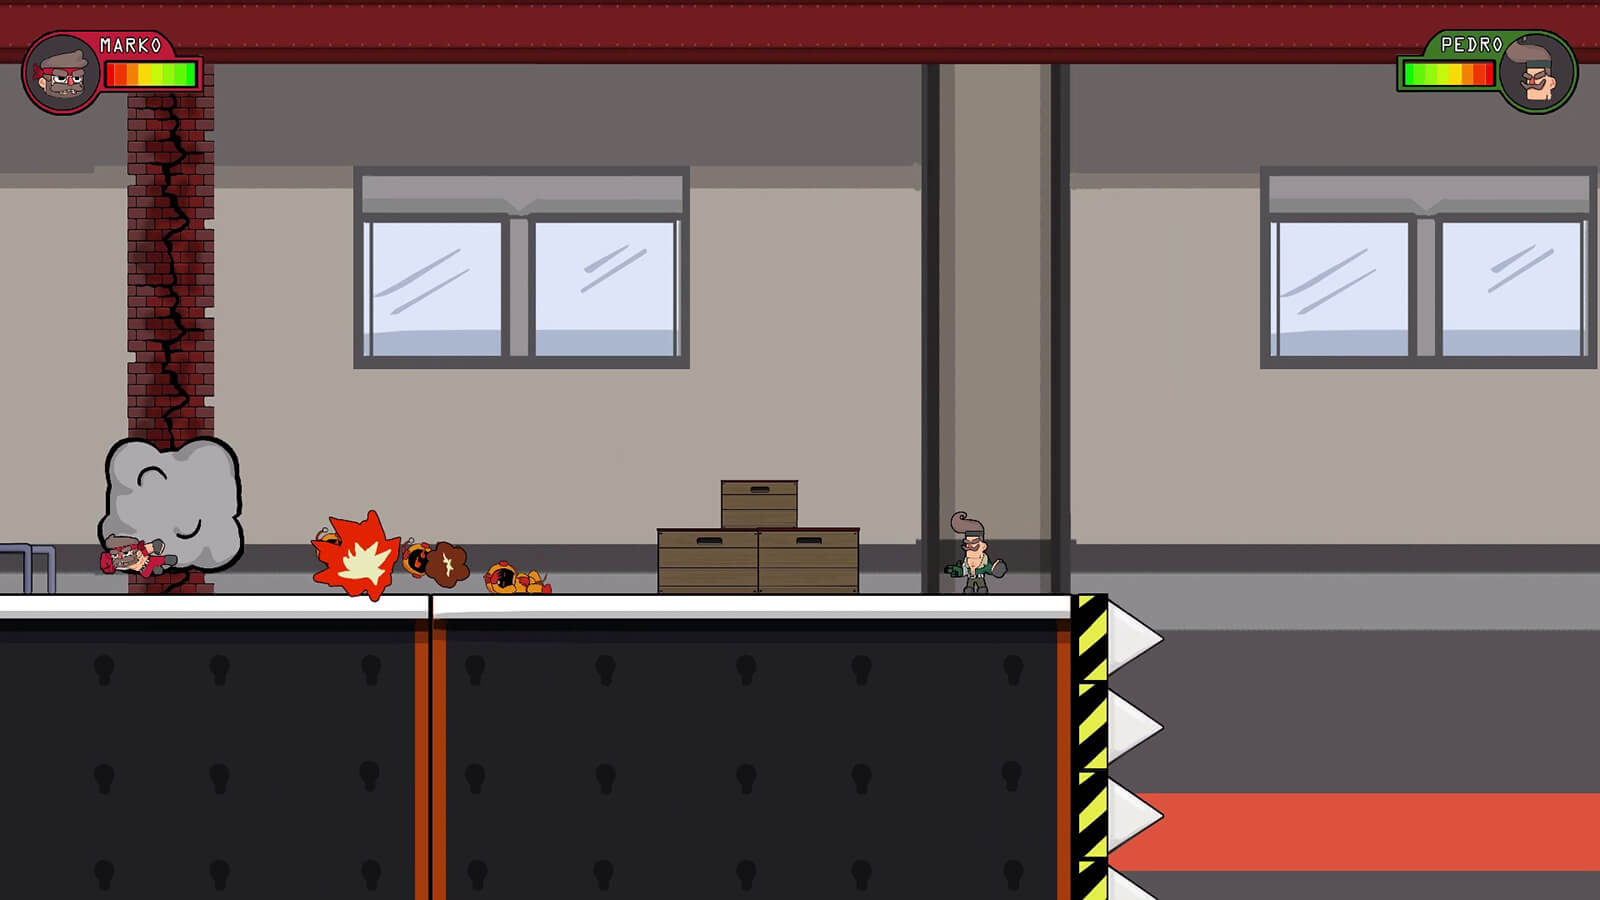 A 2D character in red garb flies through the air, leaving defeated enemies and a destroyed brick wall in his wake.